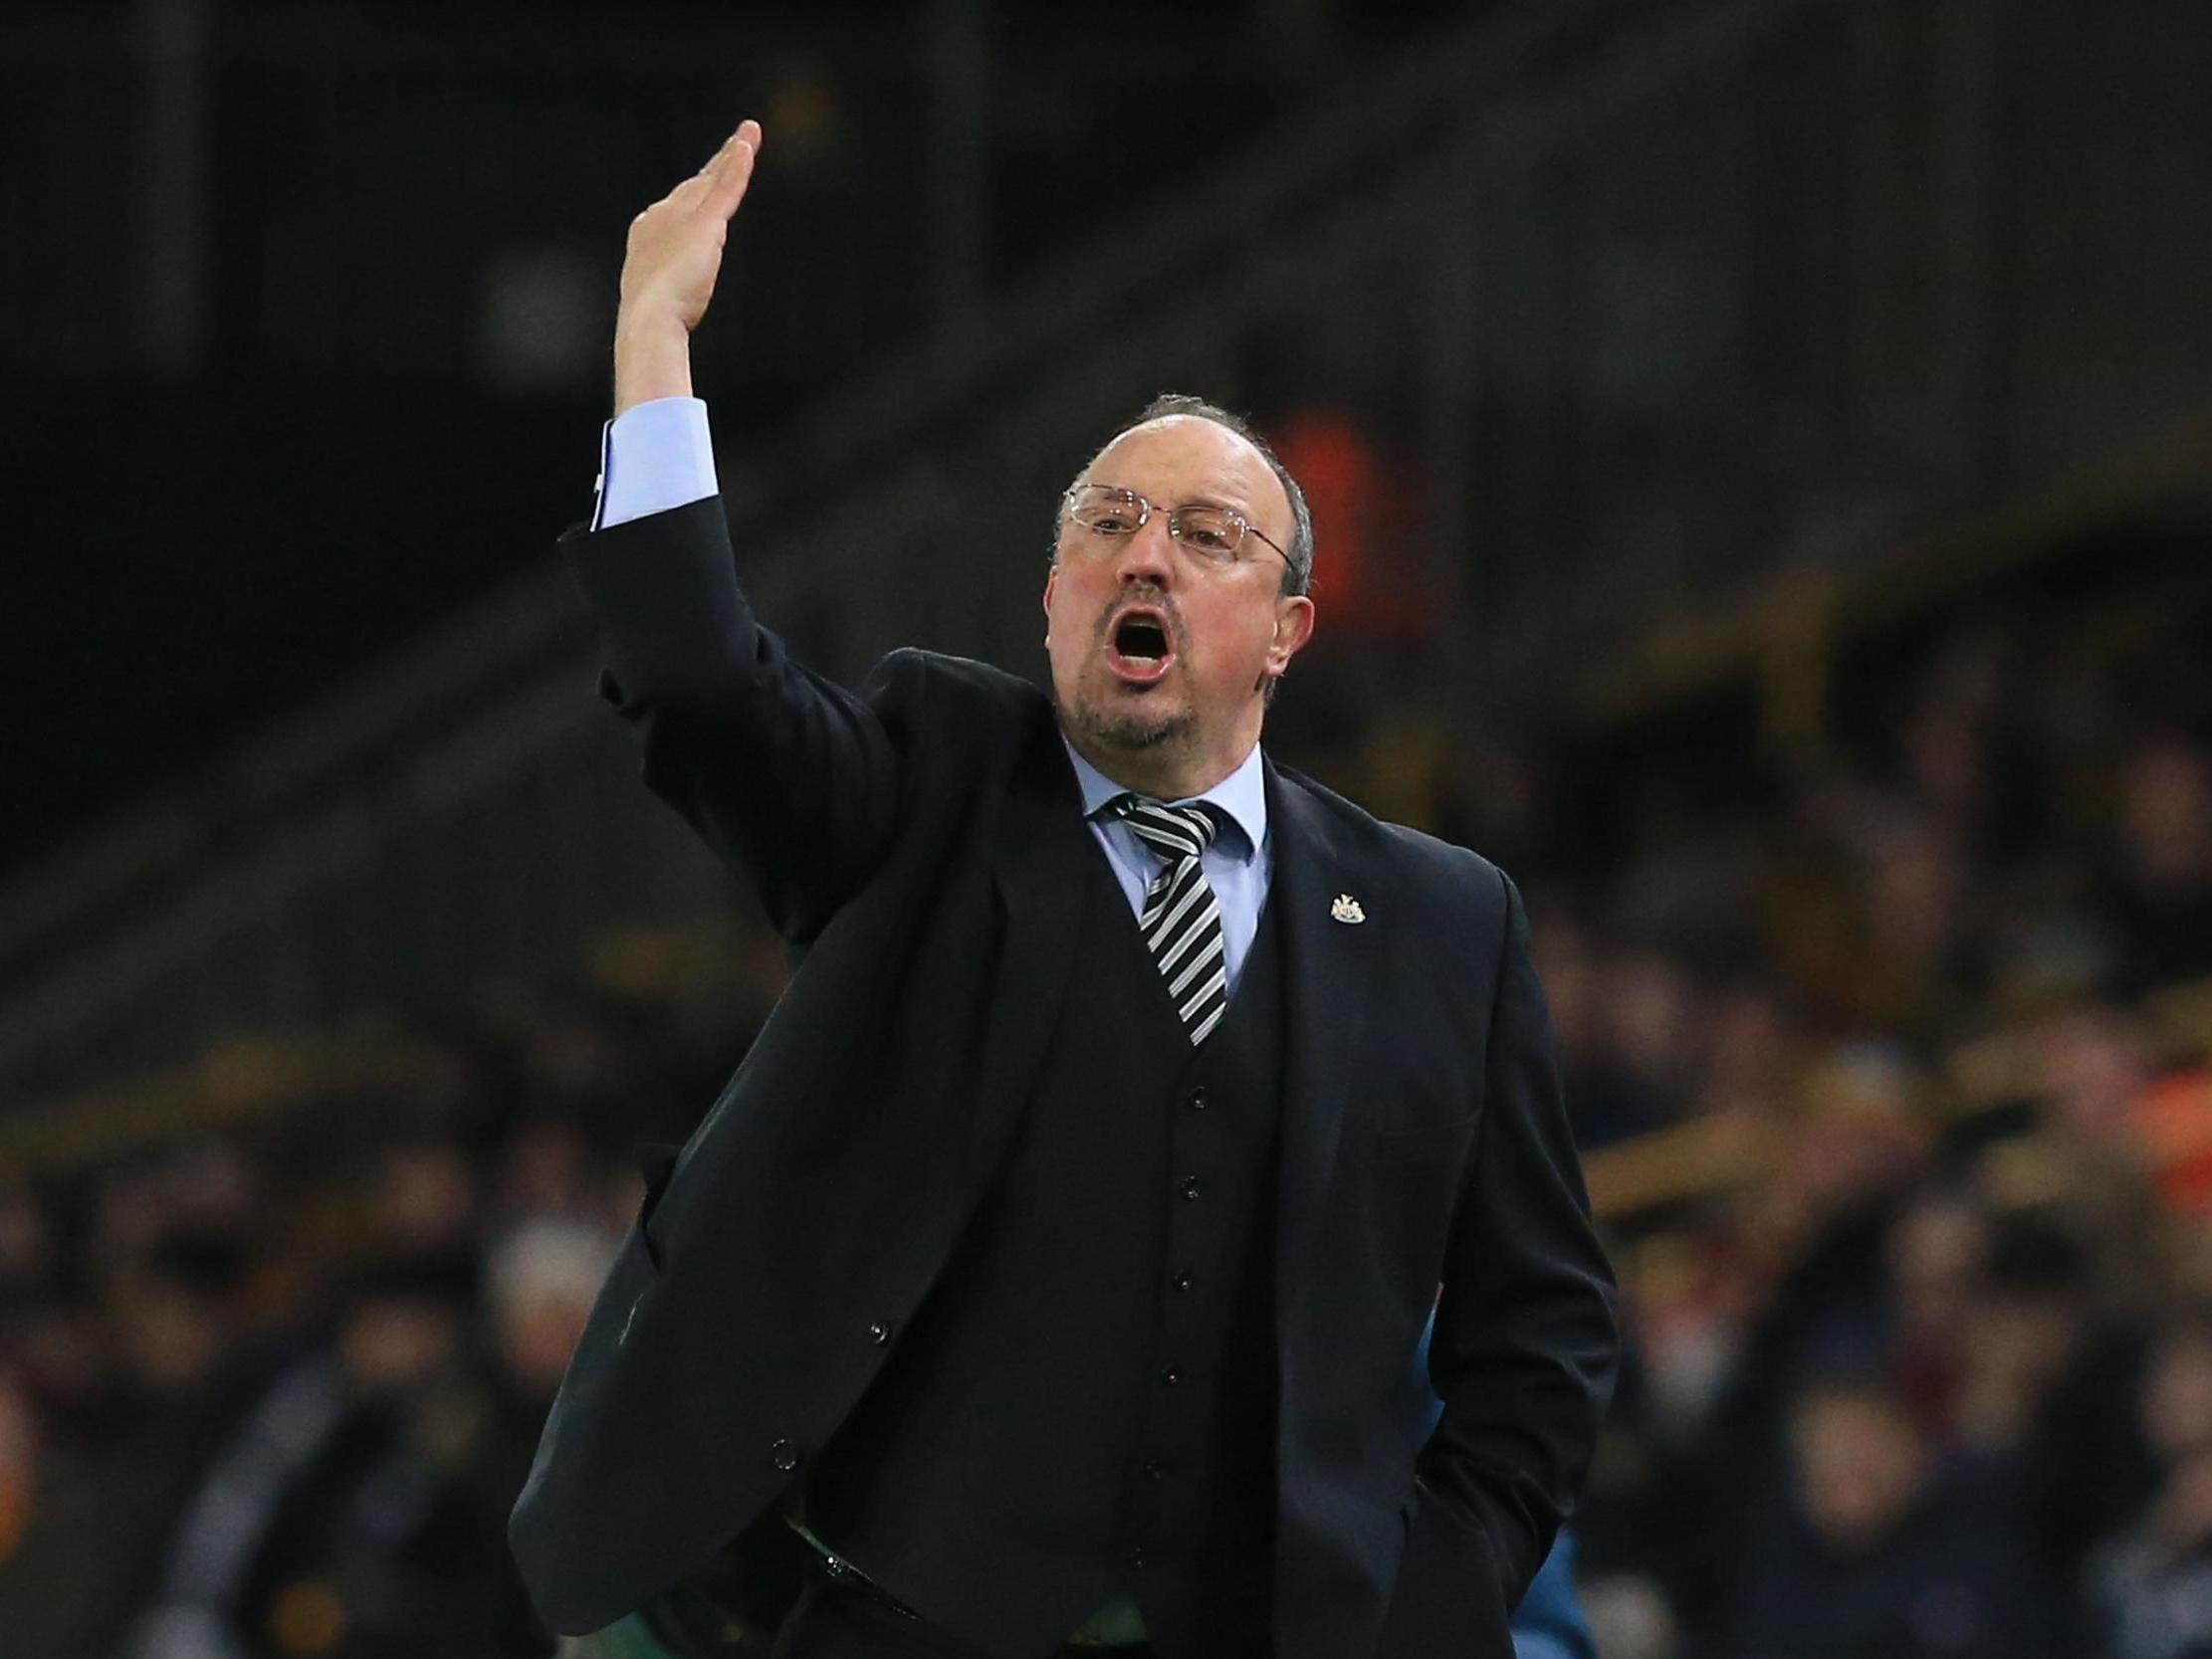 Rafa Benitez gestures from the touchline at the Molineux